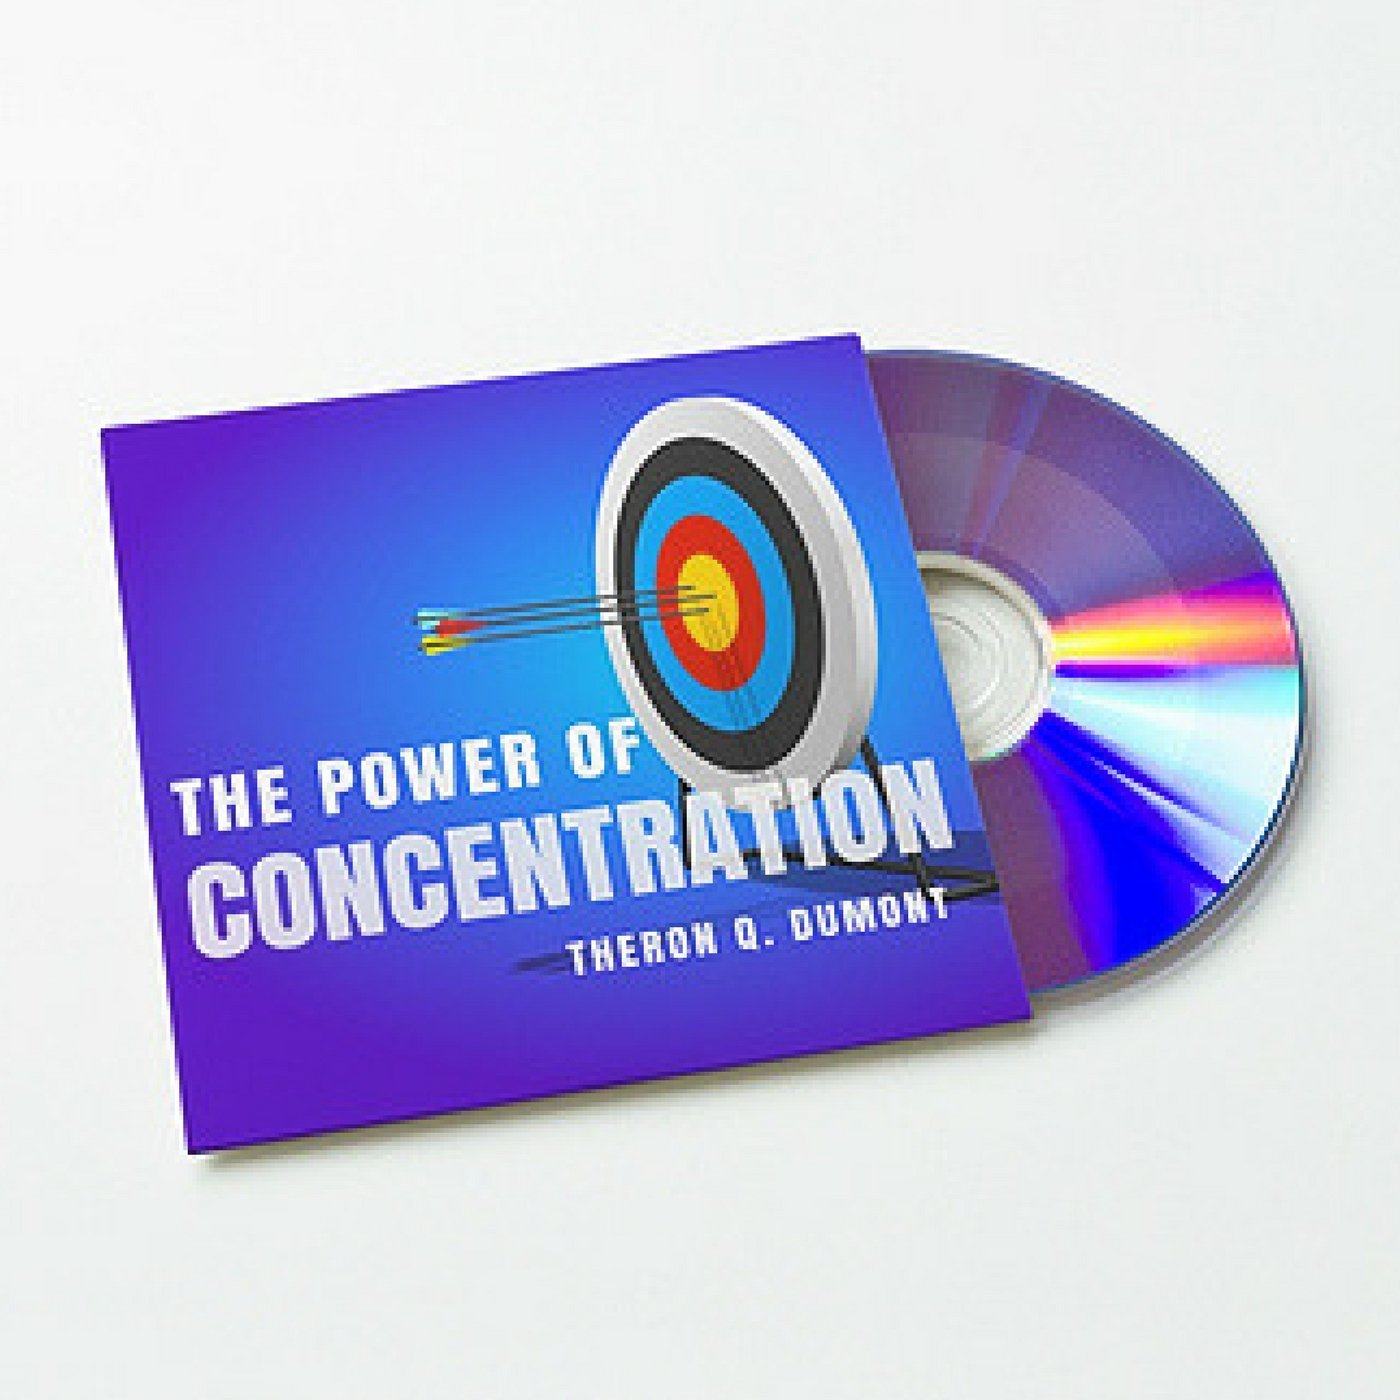 The Power of Concentration (Audiobook) - 22 Lions